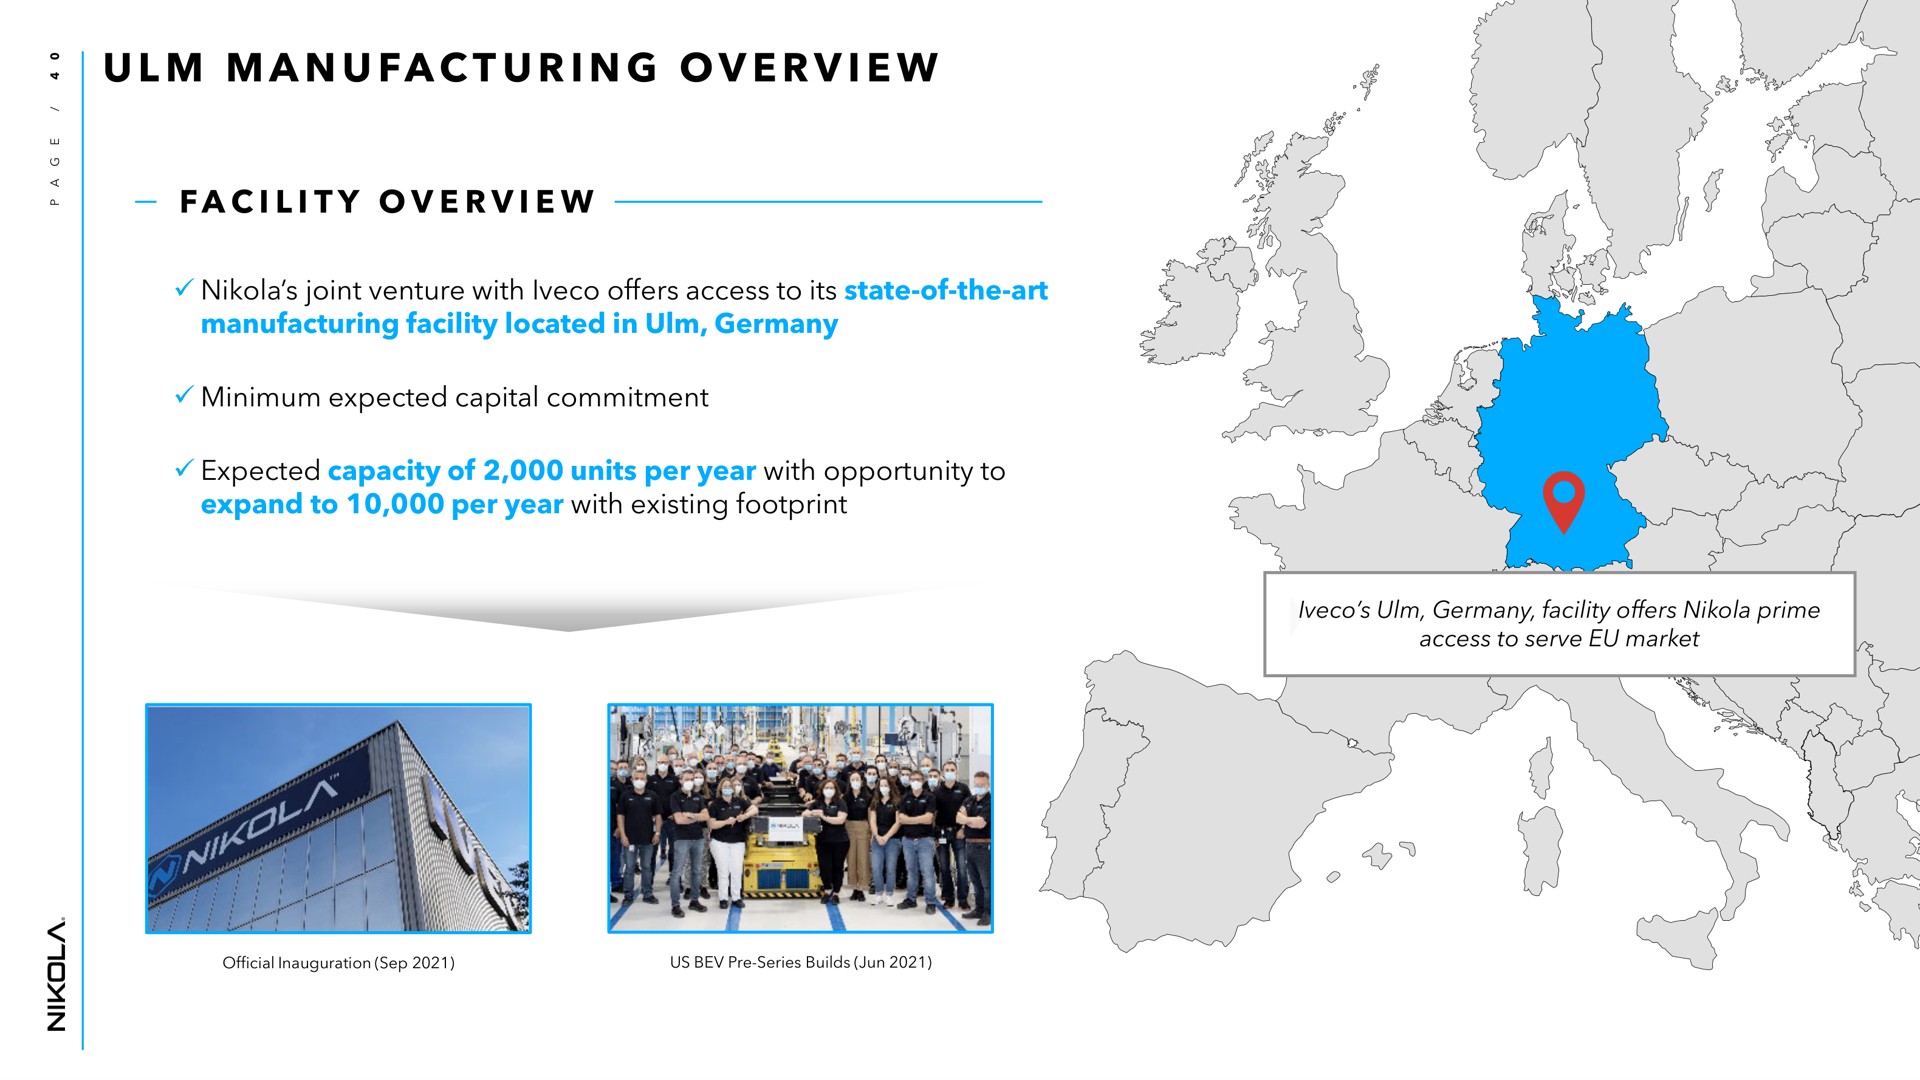 a i i a i i i manufacturing overview facility overview joint venture with offers access to its state of the art manufacturing facility located in minimum expected capital commitment expand to per year with existing footprint | Nikola